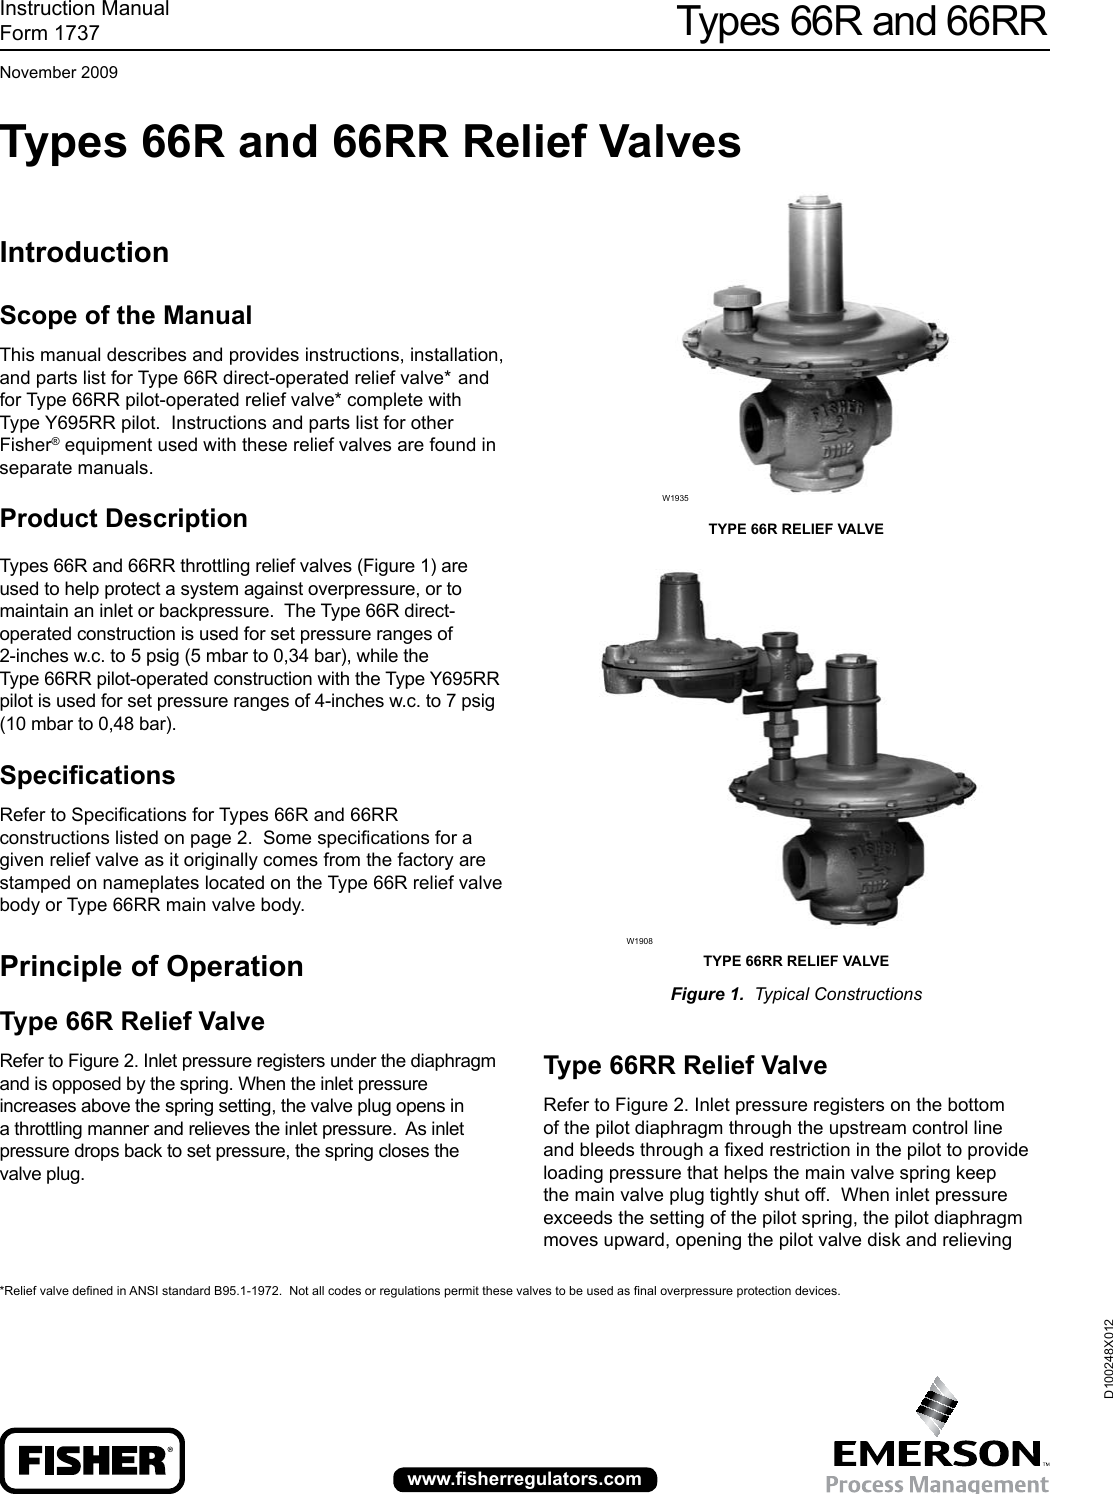 Page 1 of 12 - Emerson Emerson-66R-Series-Vapor-Recovery-Valves-Instruction-Manual-  Emerson-66r-series-vapor-recovery-valves-instruction-manual